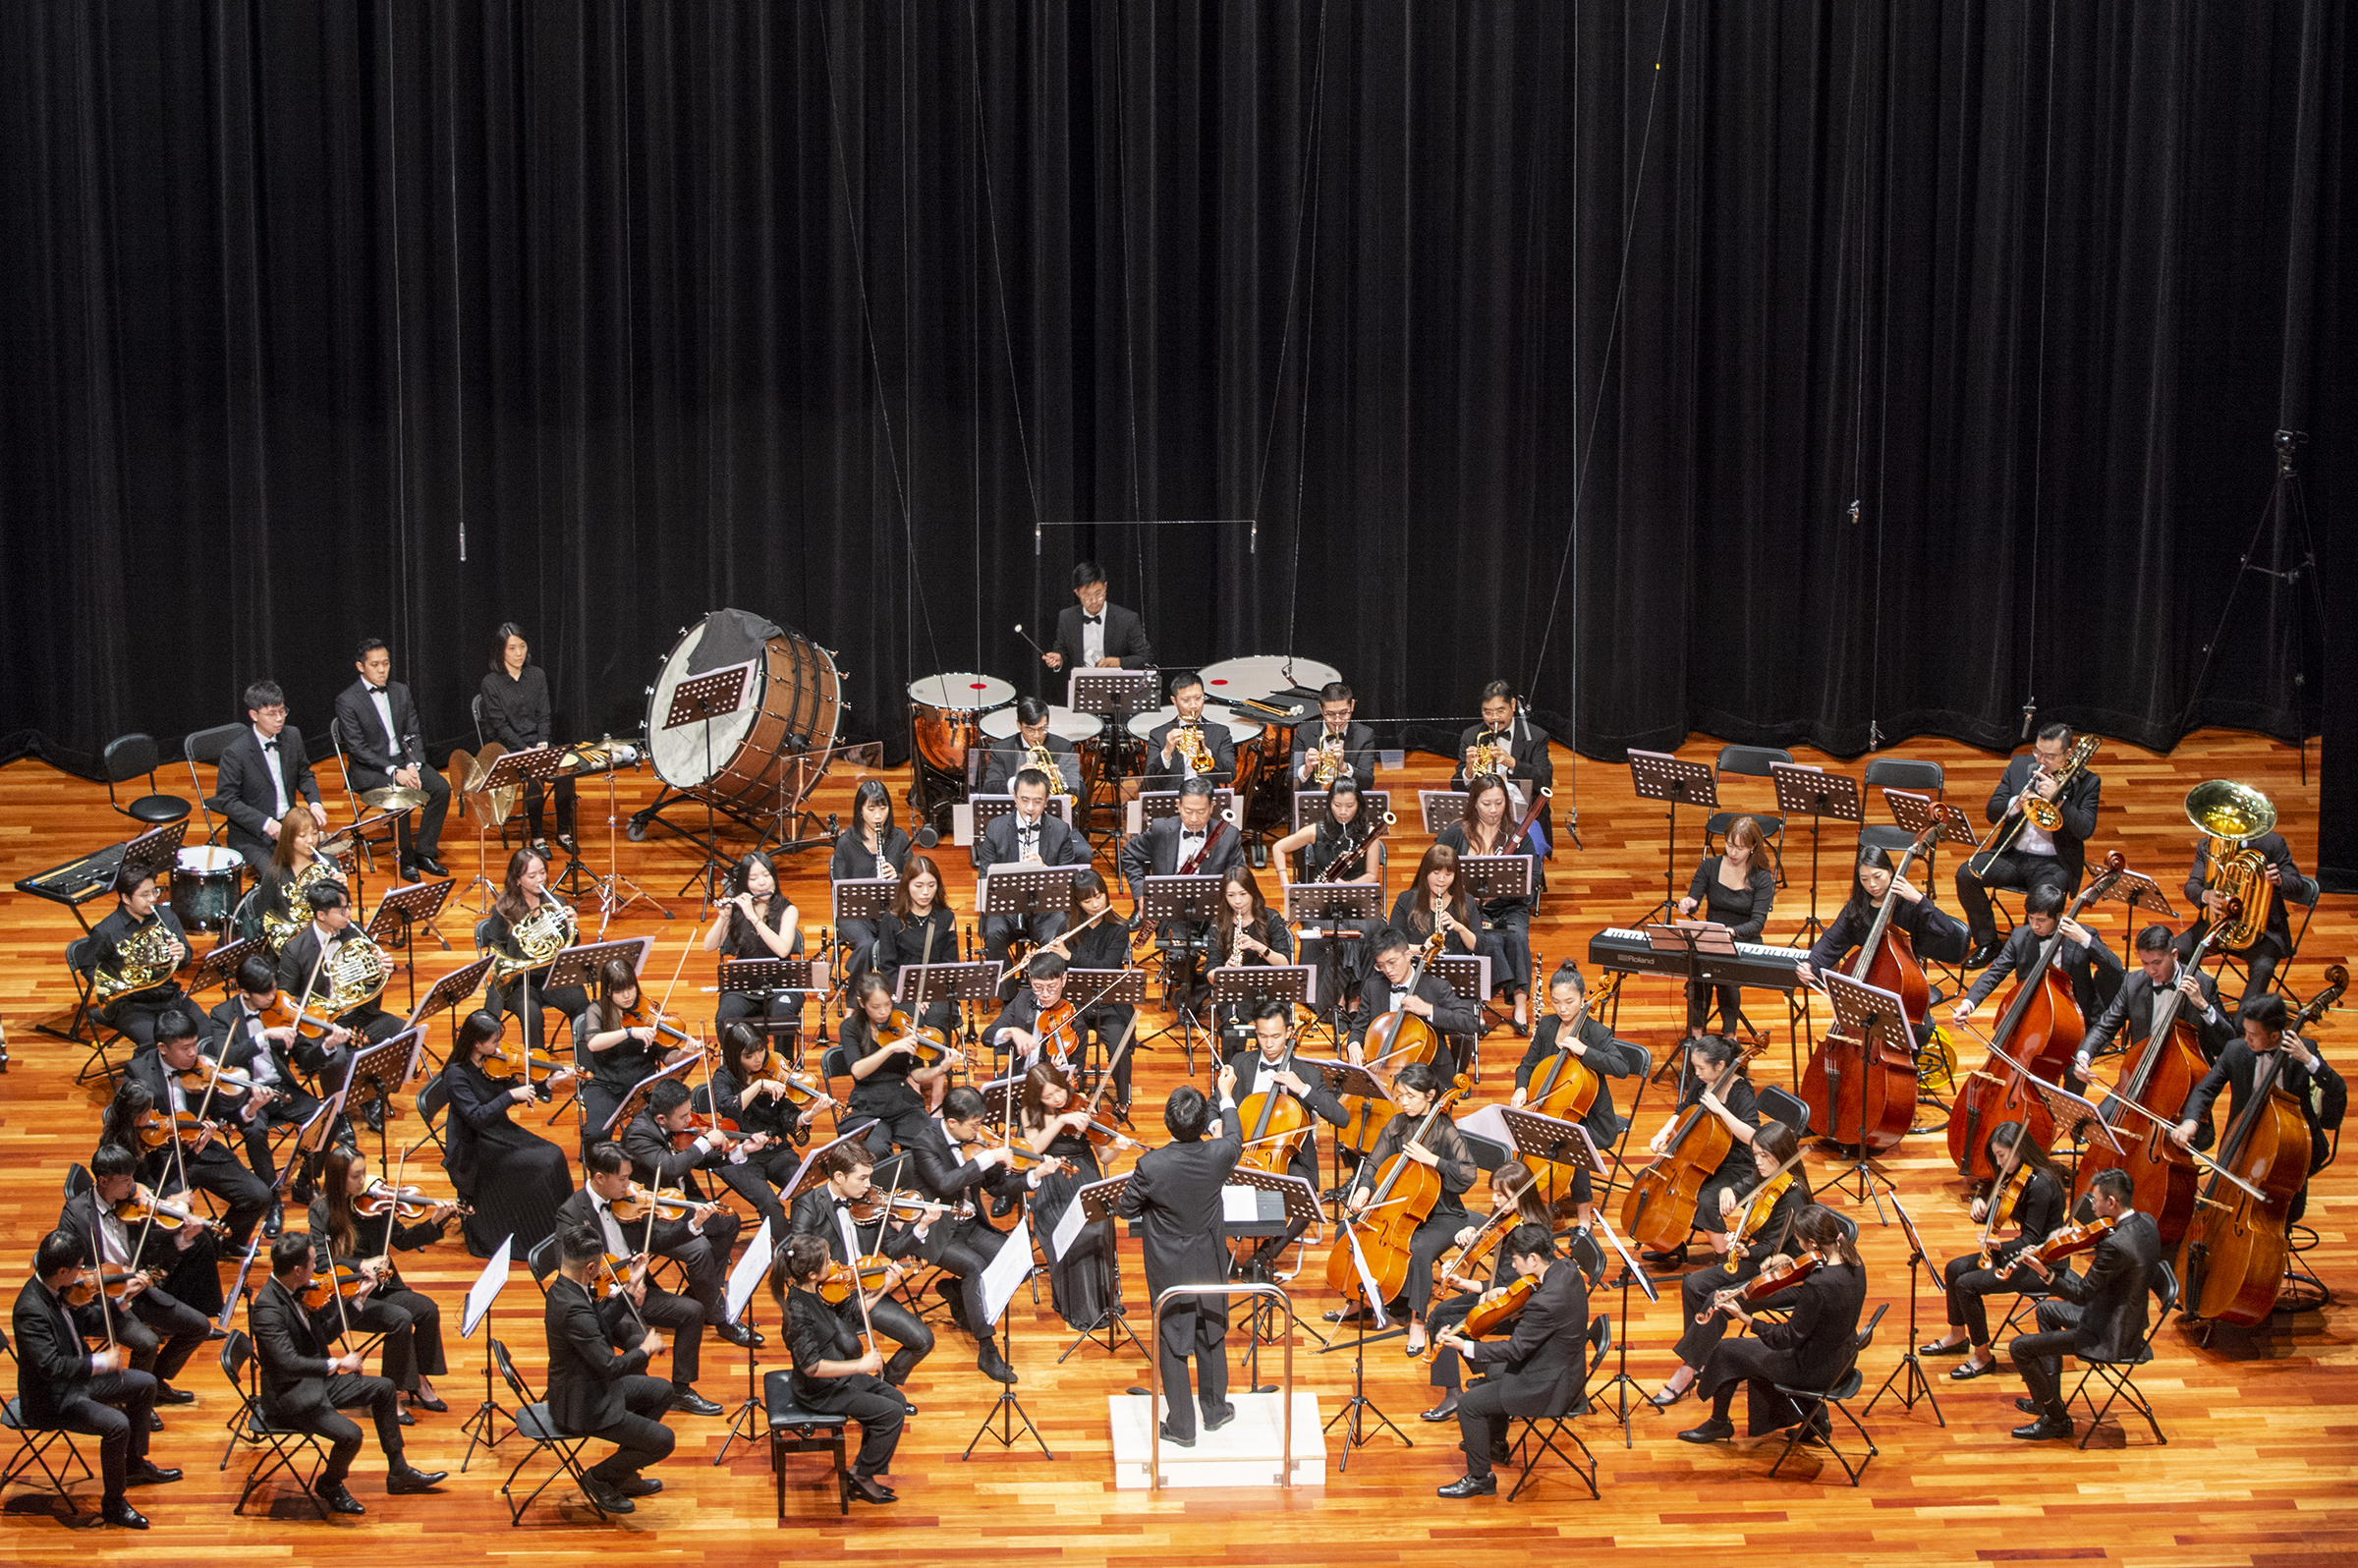 Enchanting Melodies: Great Success of the Music Concert for NCU’s 60th Anniversary Celebration